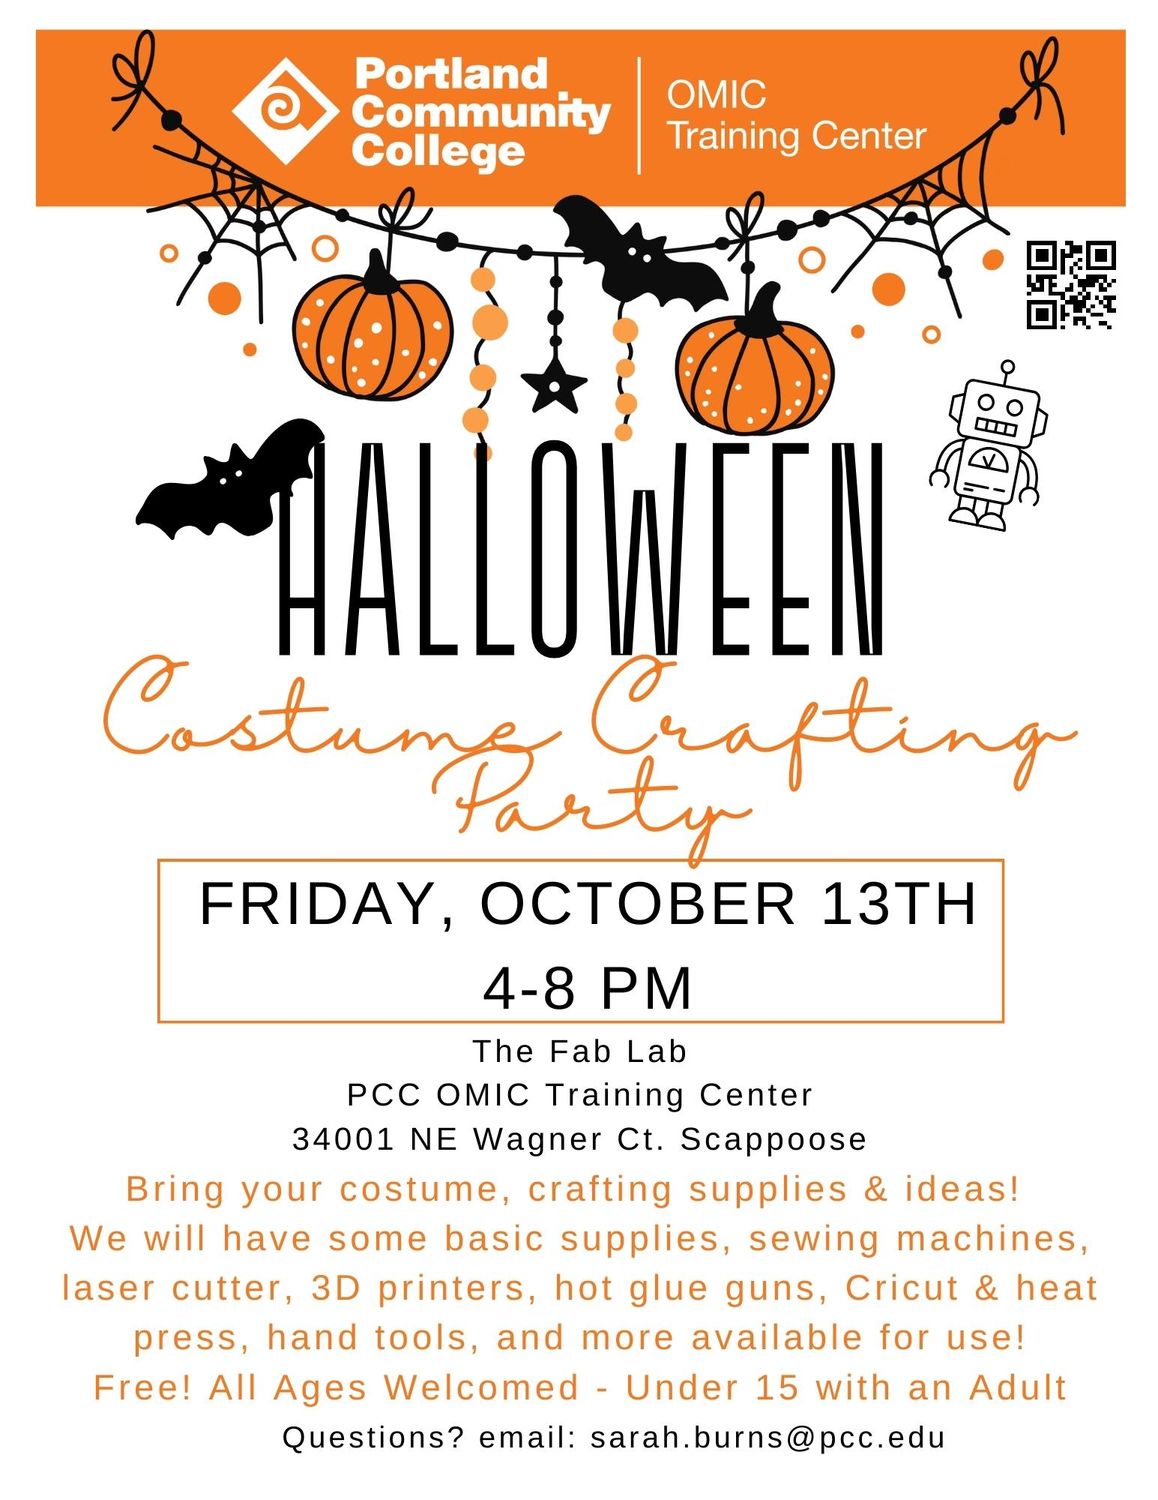  Bring your Halloween Costume and Creativity to the Fab Lab at the PCC OMIC Training Center and join us for a Costume Crafting Party! This Friday, October 13th from 4-8pm. All Ages Welcome, Kids under 15 with adult supervision. Free! We will have the sewing machine and serger running, 3d Printers and laser cutter, hot glue guns, soldering irons, cricut and heat press, plus a small selection of Donated notions, and bits-and-bobs available. Bring any materials you need, and we can help you bring your spooky Halloween Costume Creations to life! 